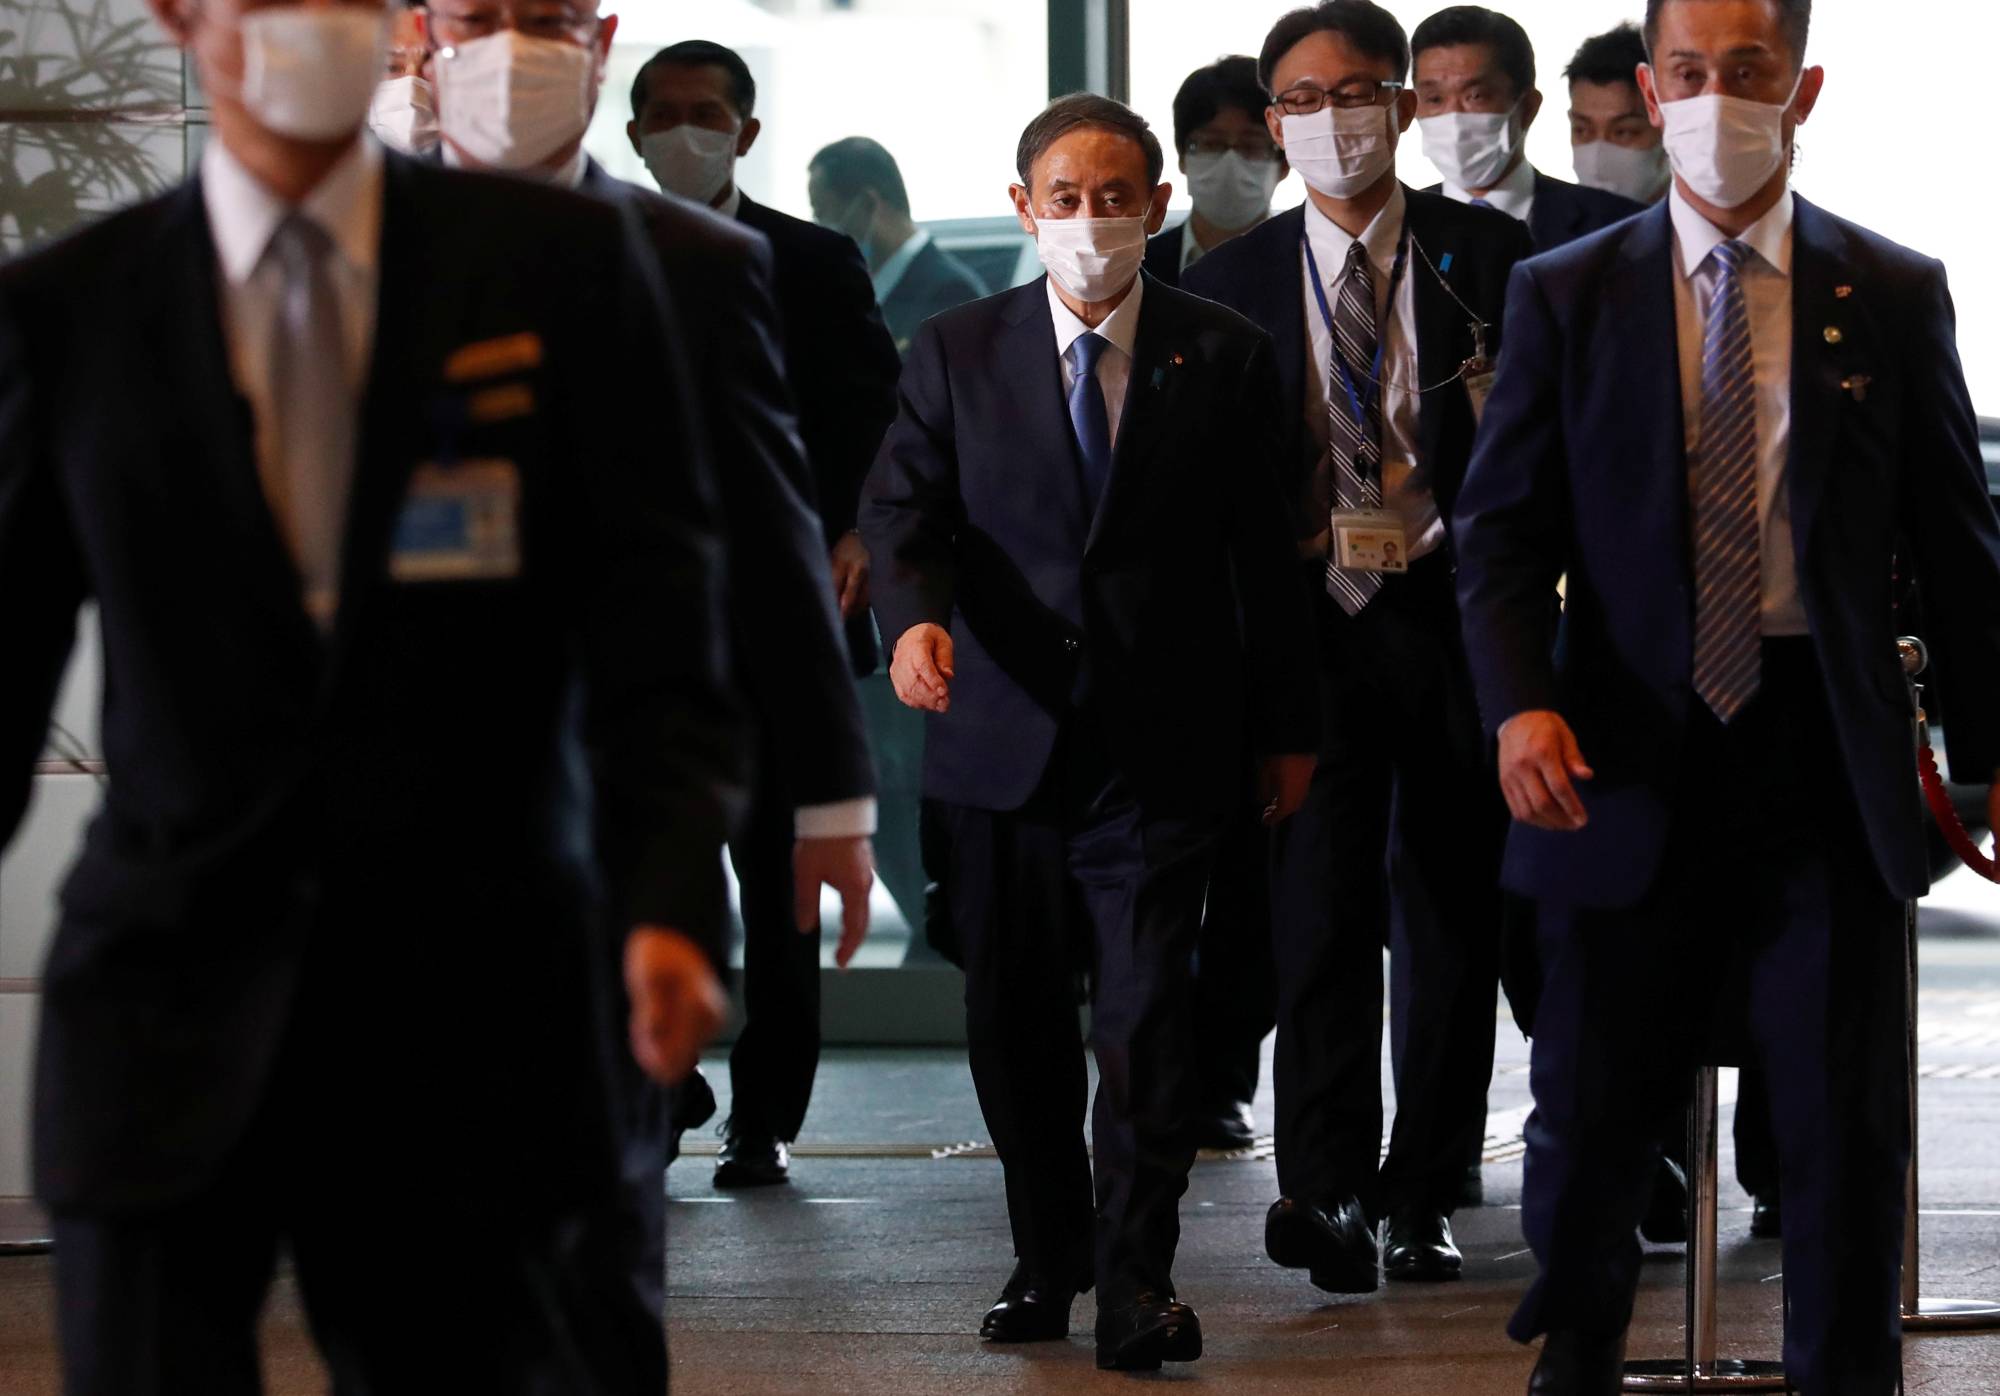 Newly elected Prime Minister Yoshihide Suga arrives at the Prime Minister's Office in Tokyo on Wednesday. | REUTERS